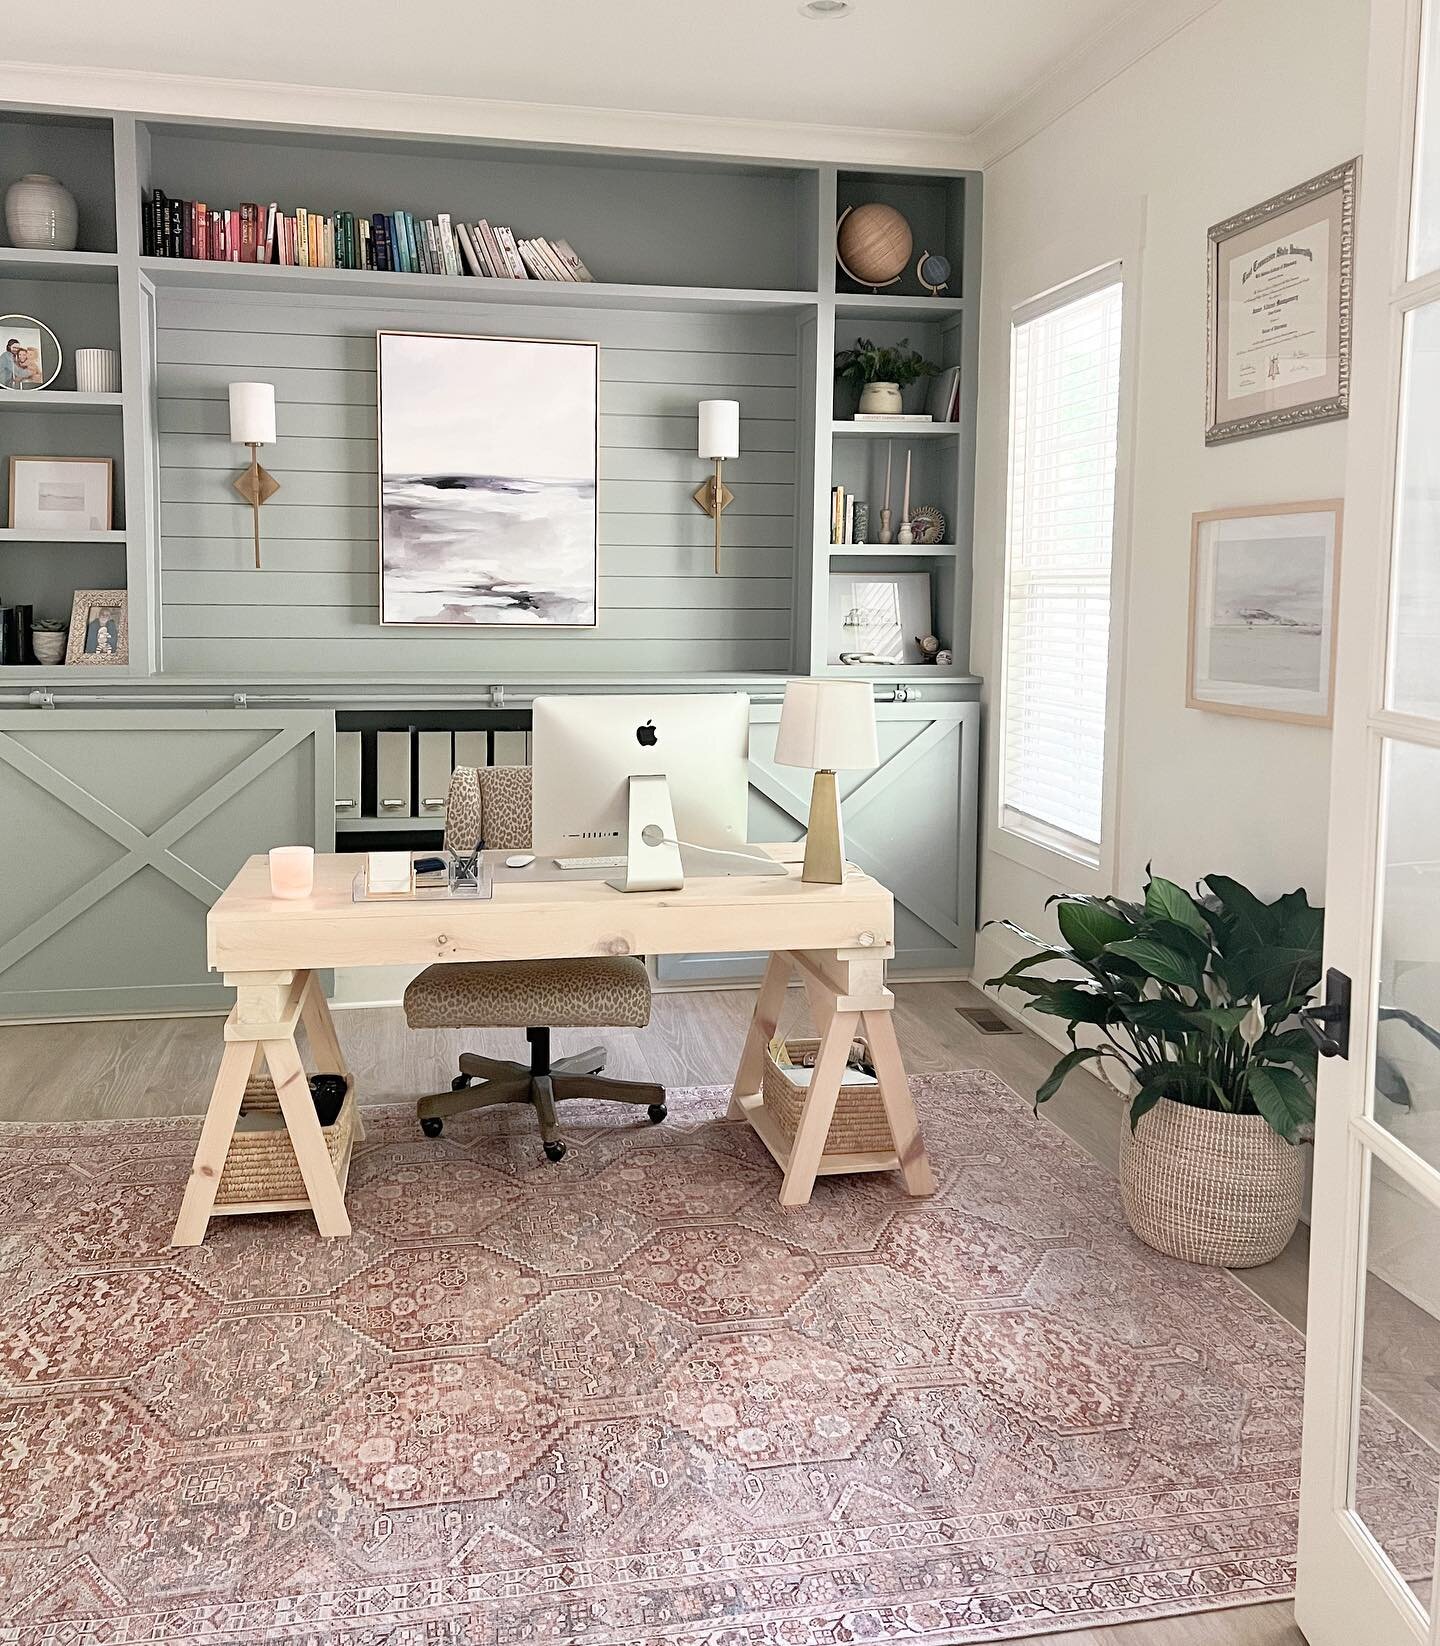 The office got a new rug! 🎉 And she&rsquo;s almost 50% off today for the WAY DAY sale! 🎉 

WAY DAY is Wayfair&rsquo;s biggest event if the year! So many beautiful @loloirugs are on super sale! 

I&rsquo;m adding my favorites (including this @chrisl